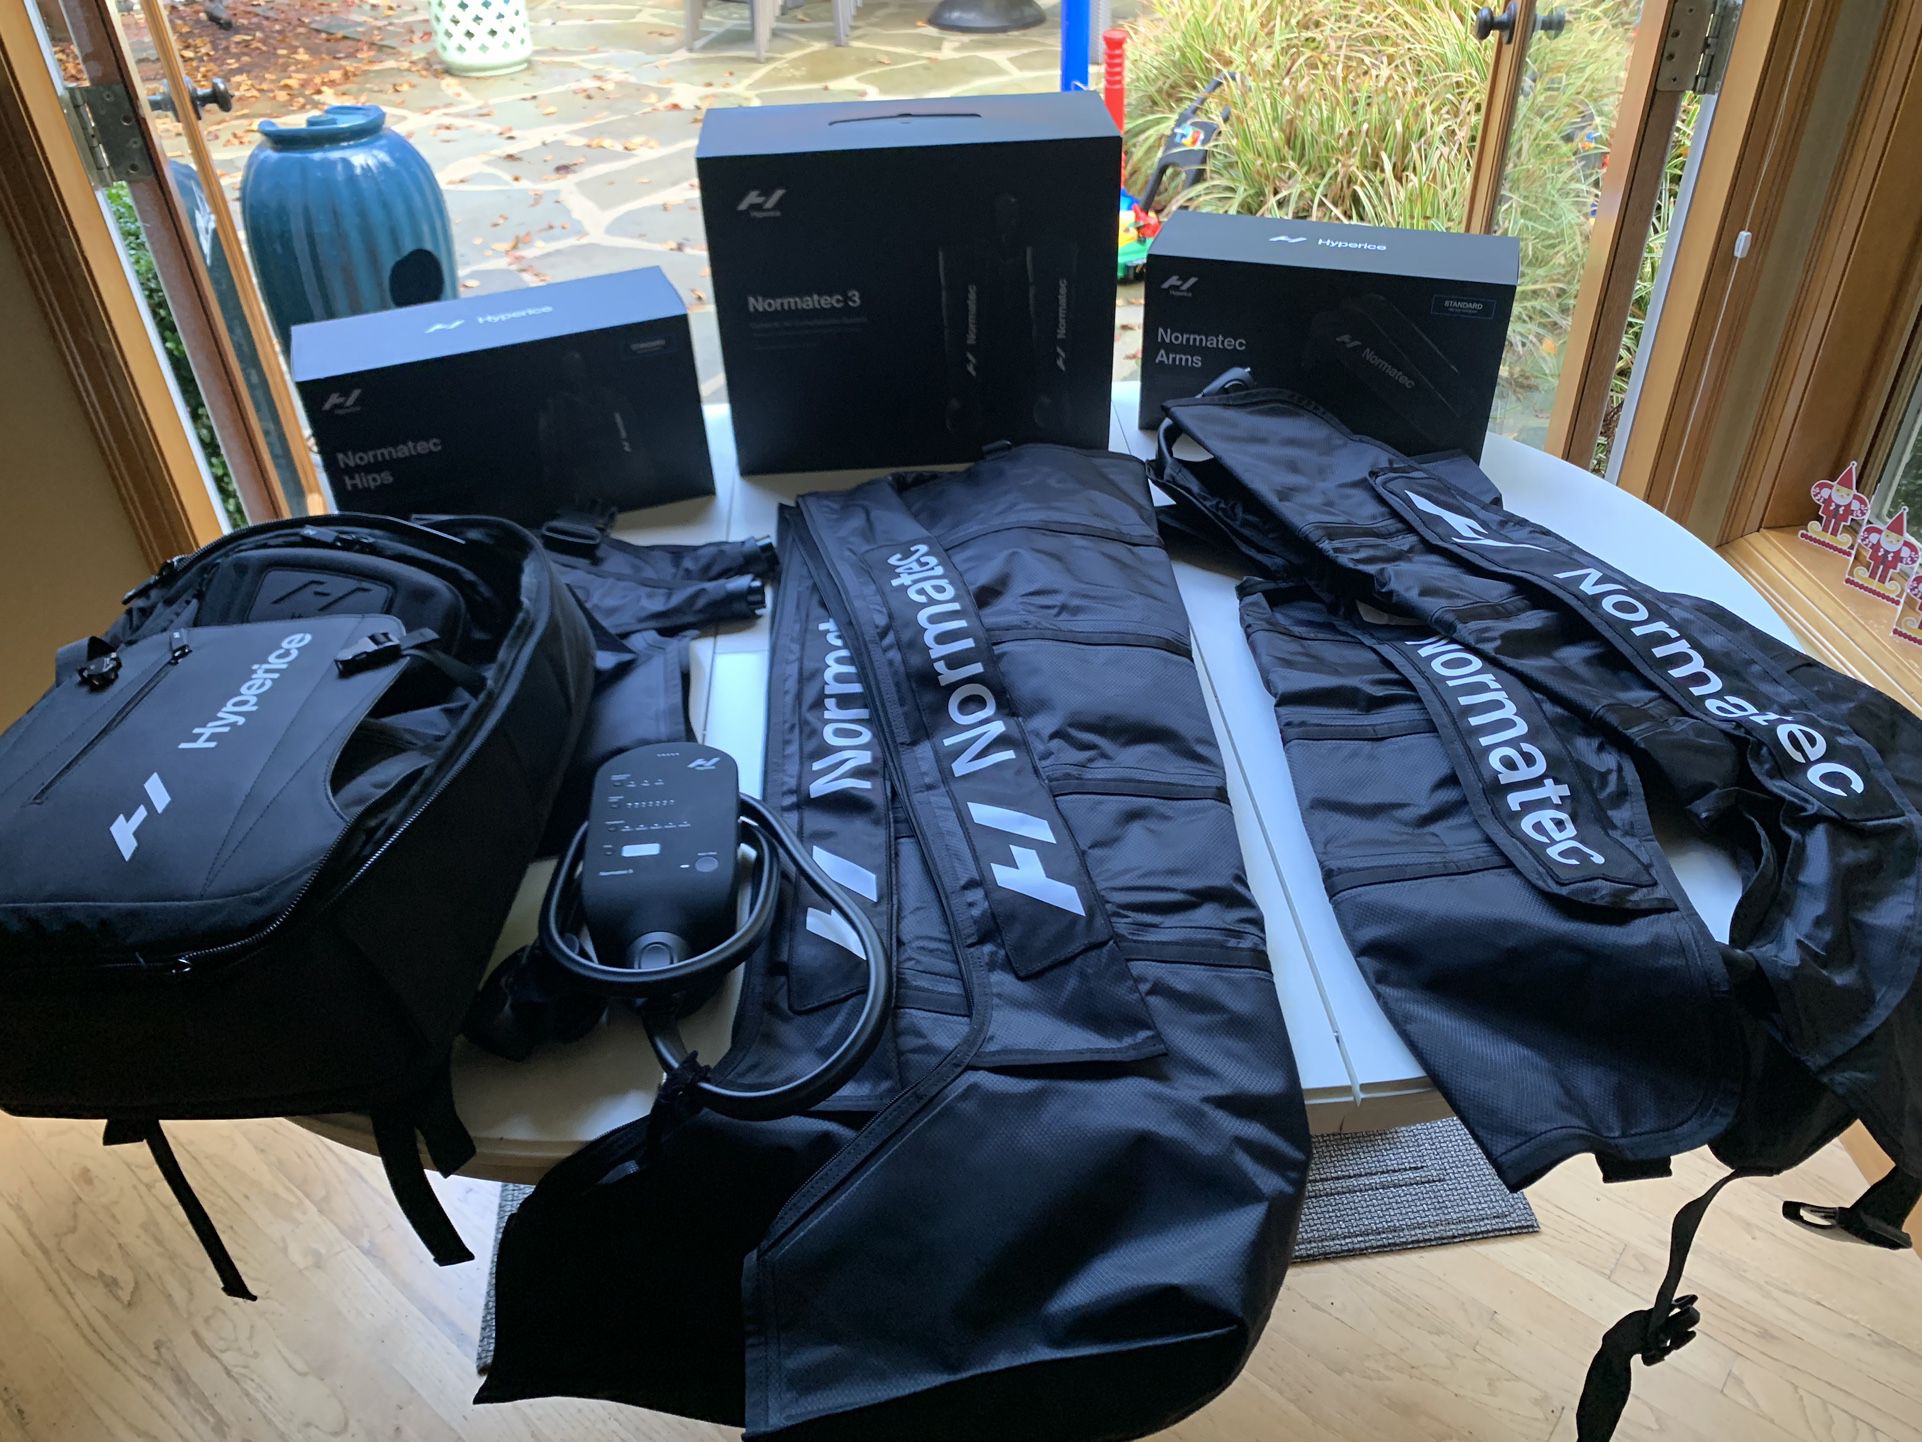 Normatec 3 Full Body + Normatec Backpack